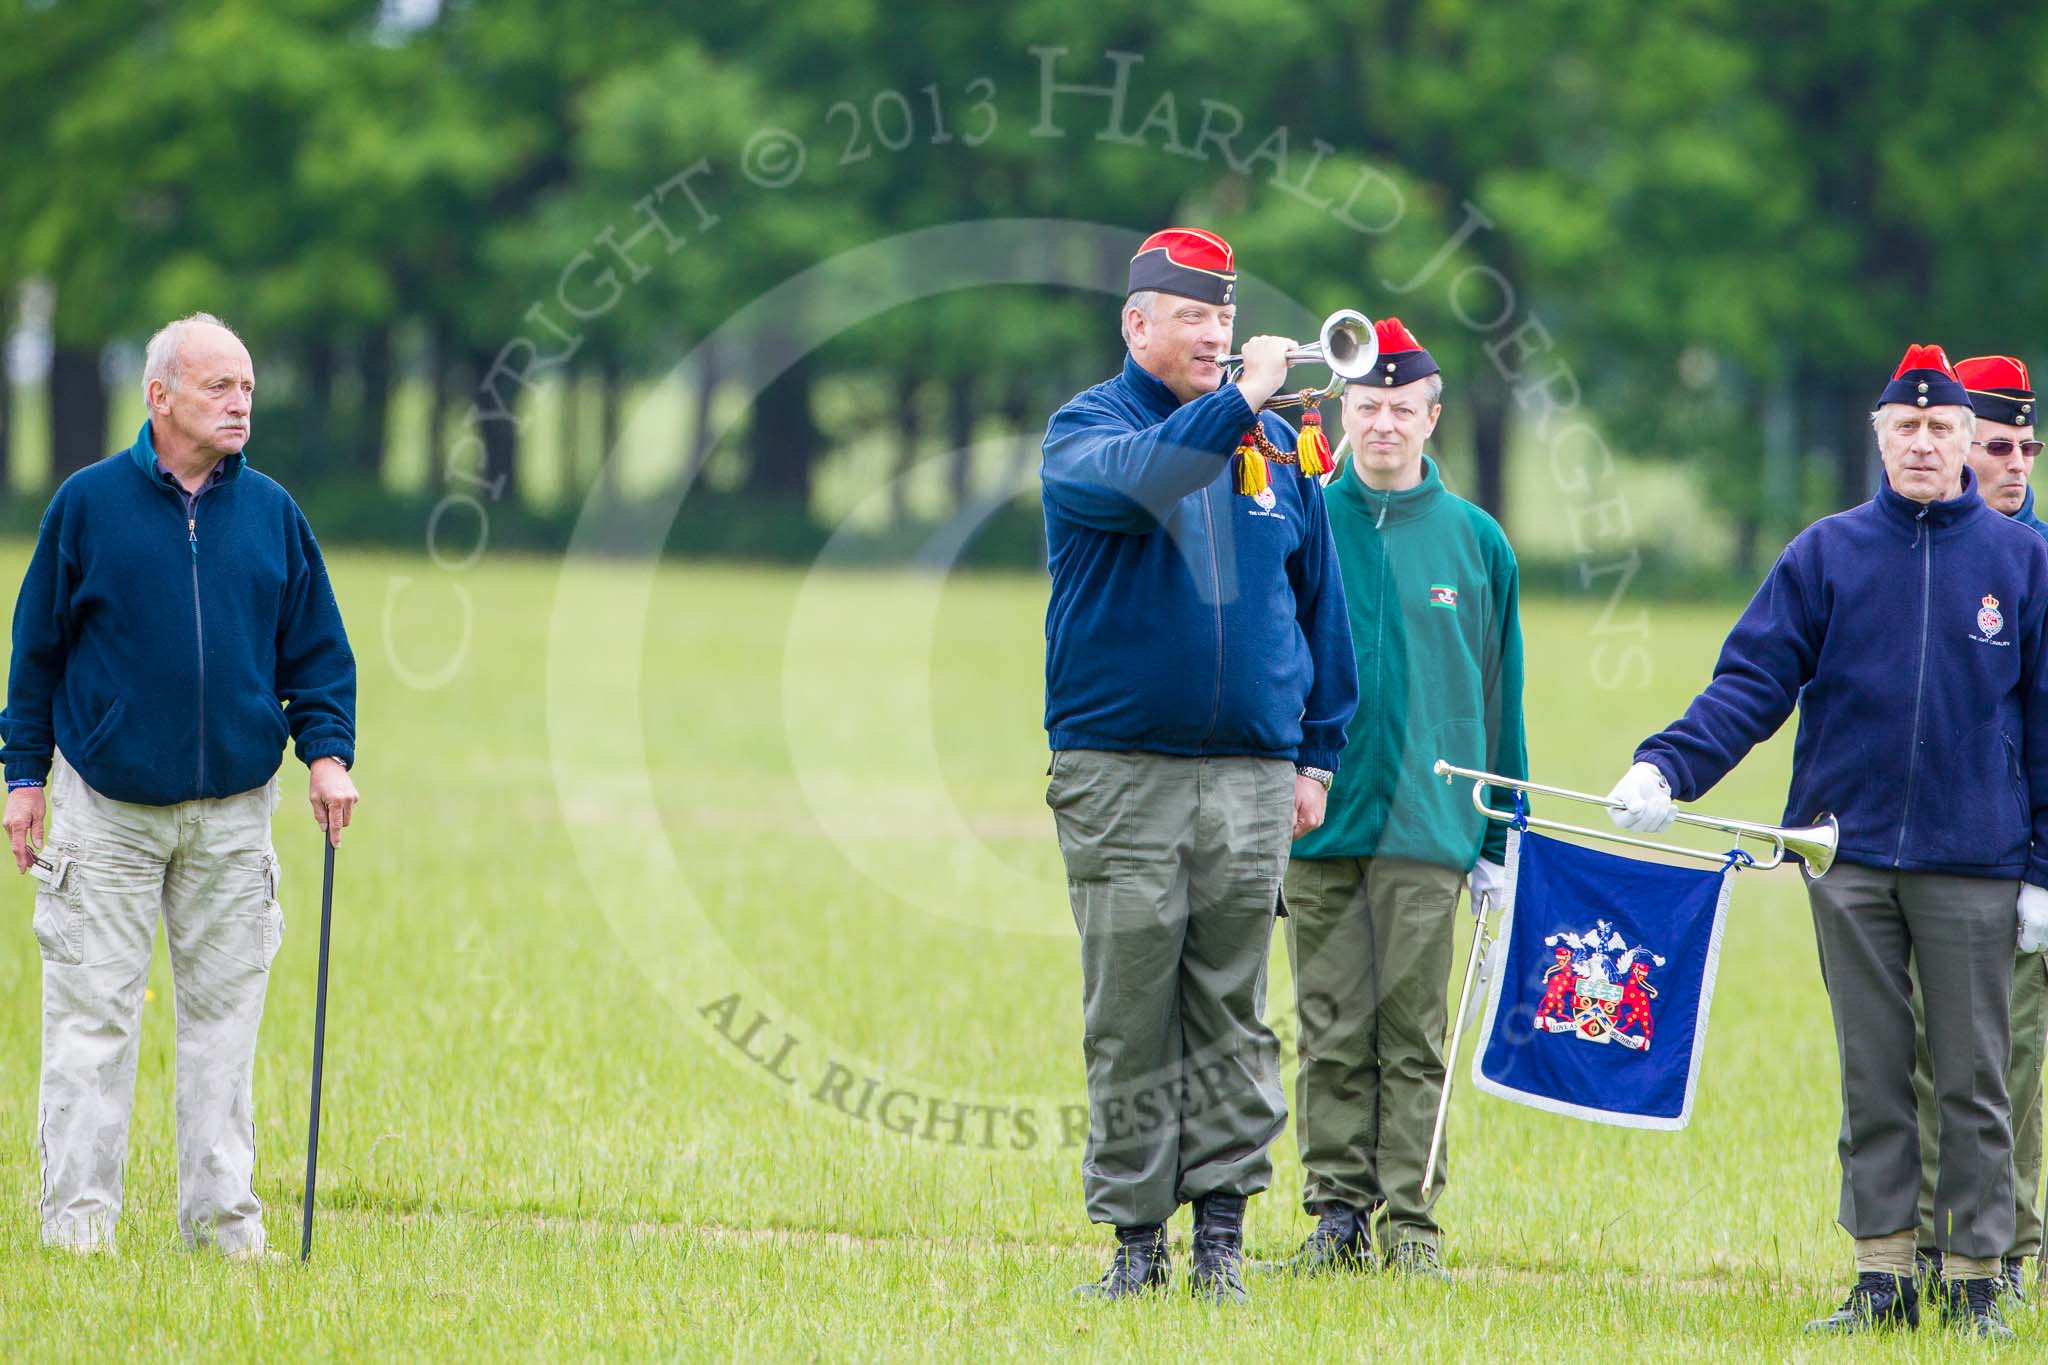 The Light Cavalry HAC Annual Review and Inspection 2013.
Windsor Great Park Review Ground,
Windsor,
Berkshire,
United Kingdom,
on 09 June 2013 at 10:51, image #94